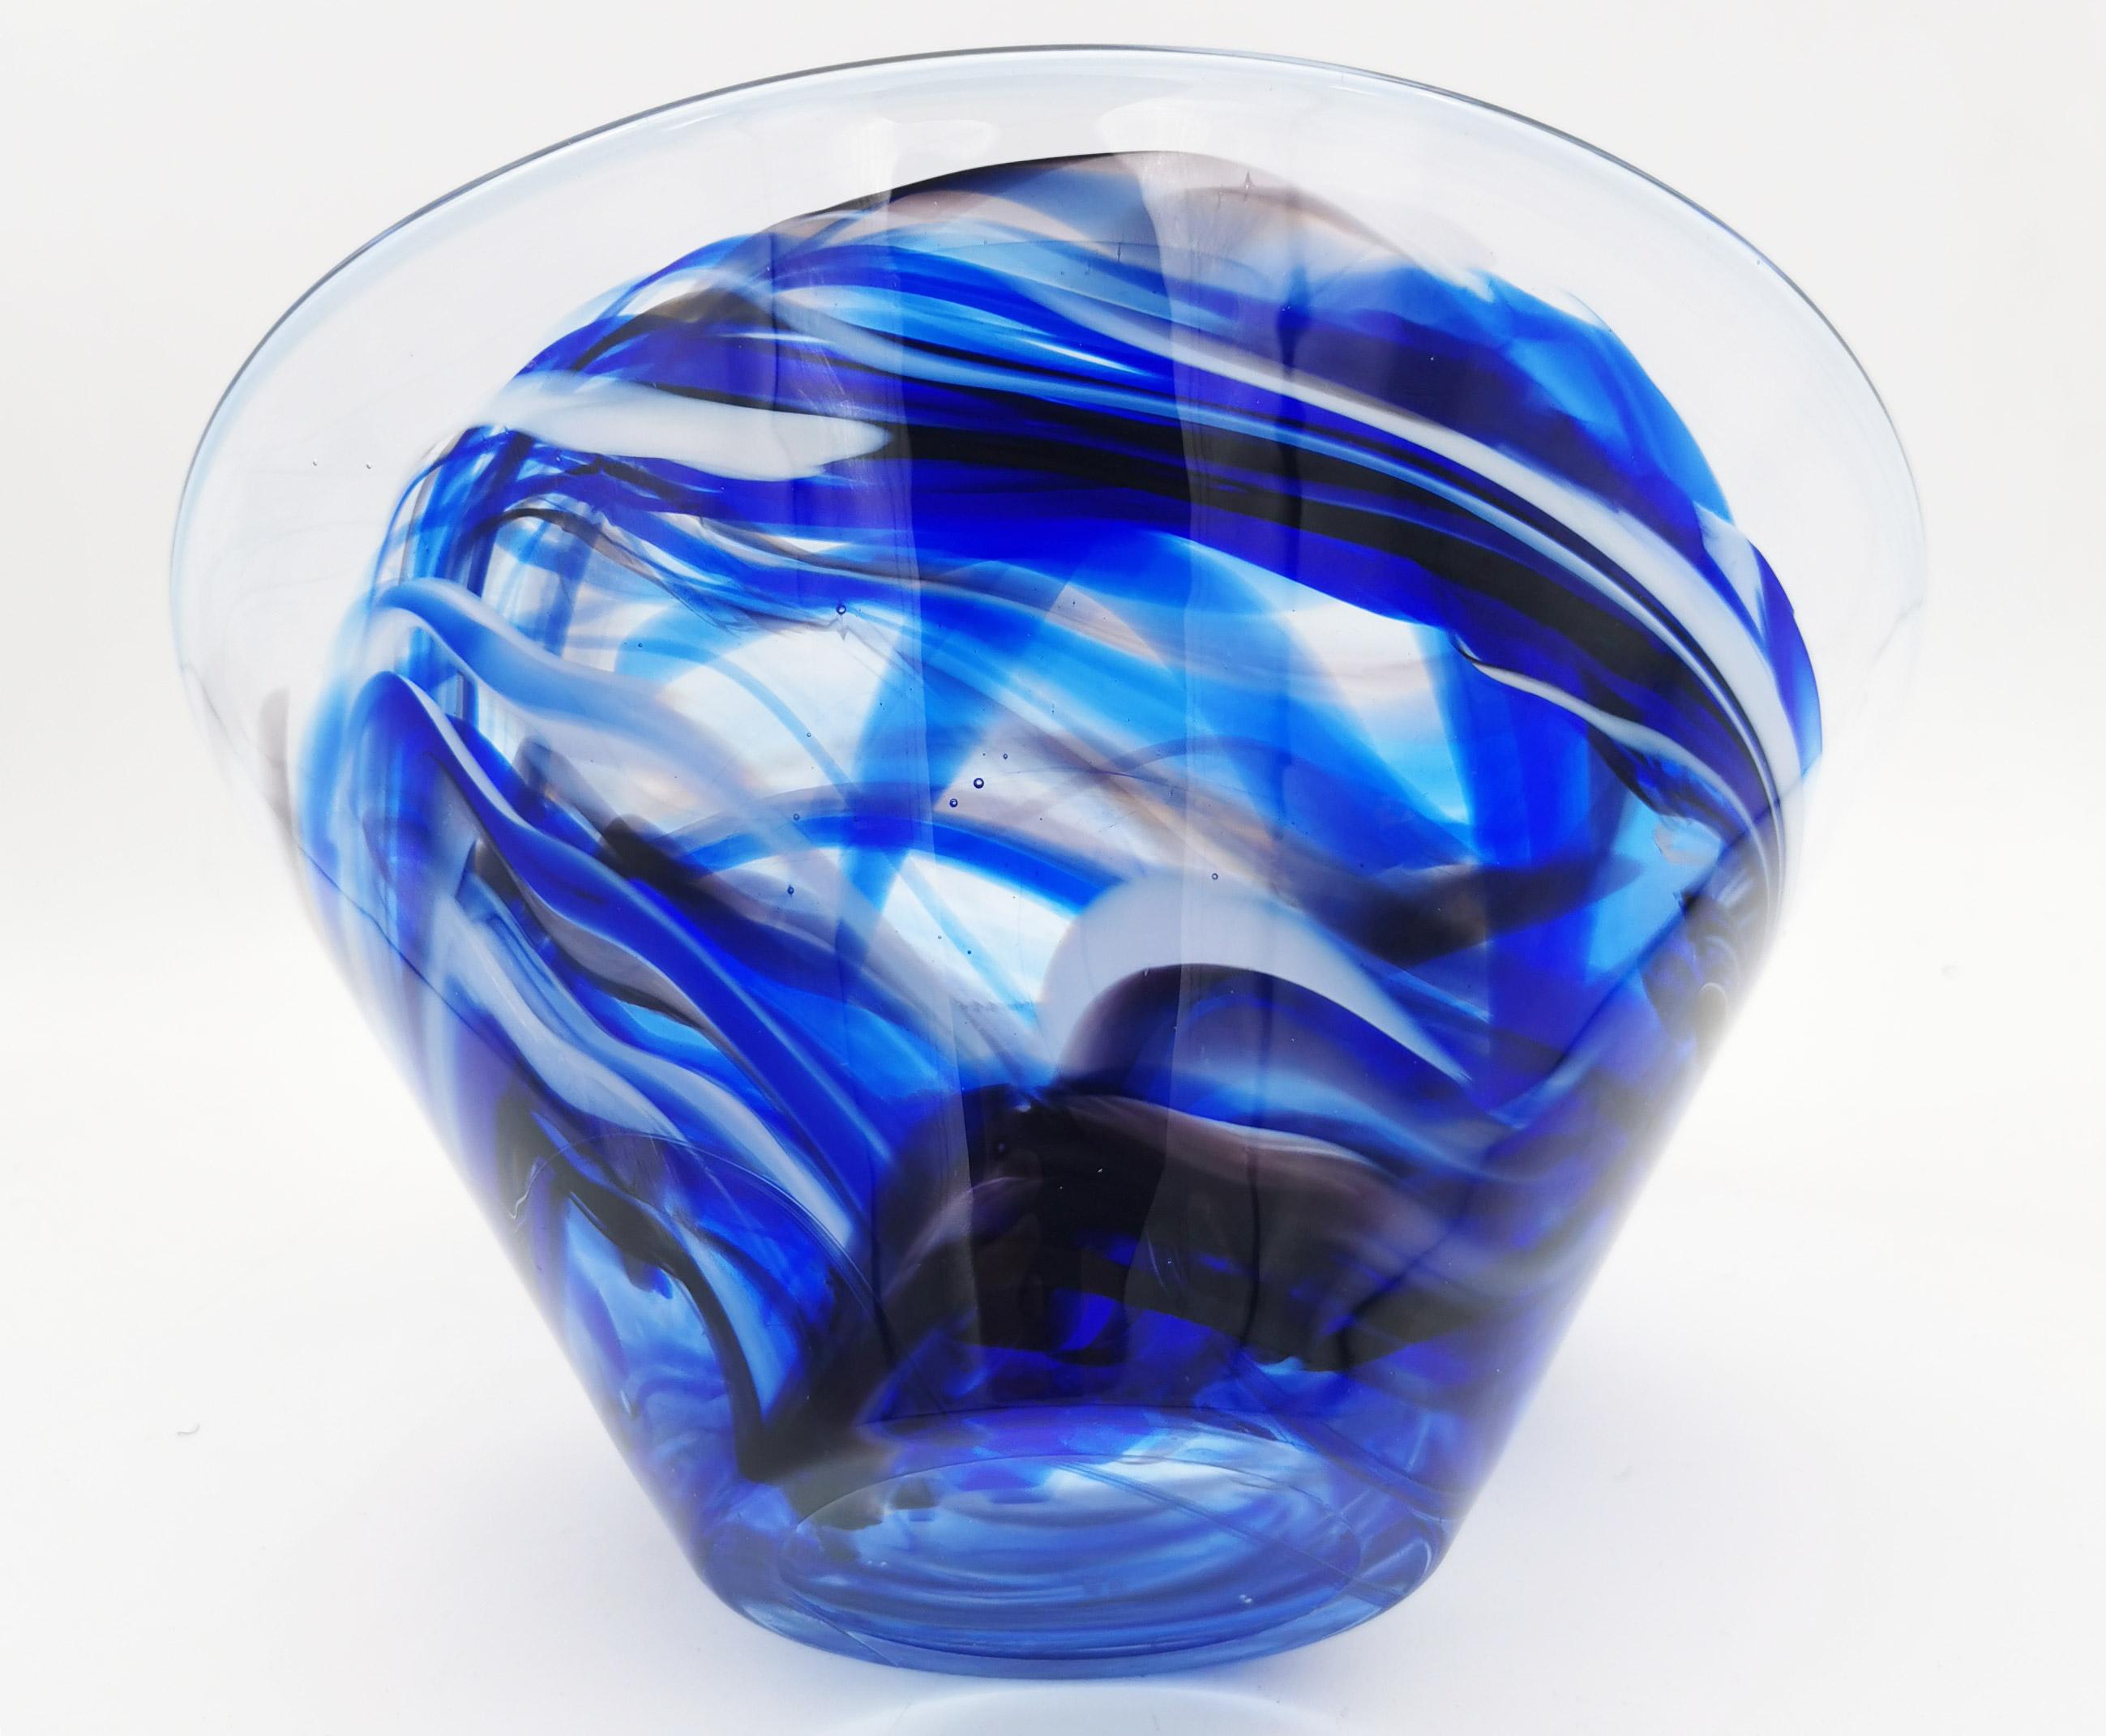 Contrast bowl - Anna Ehrner

Measures: Height. 12cm - Diameter.24cm
Designer - Anna Ehrner
2.7 kg
1980s

Contrasting bowl in blue and white colors.
Beautiful bowl with suggestive colors, in thick transparent glass flecked with white and